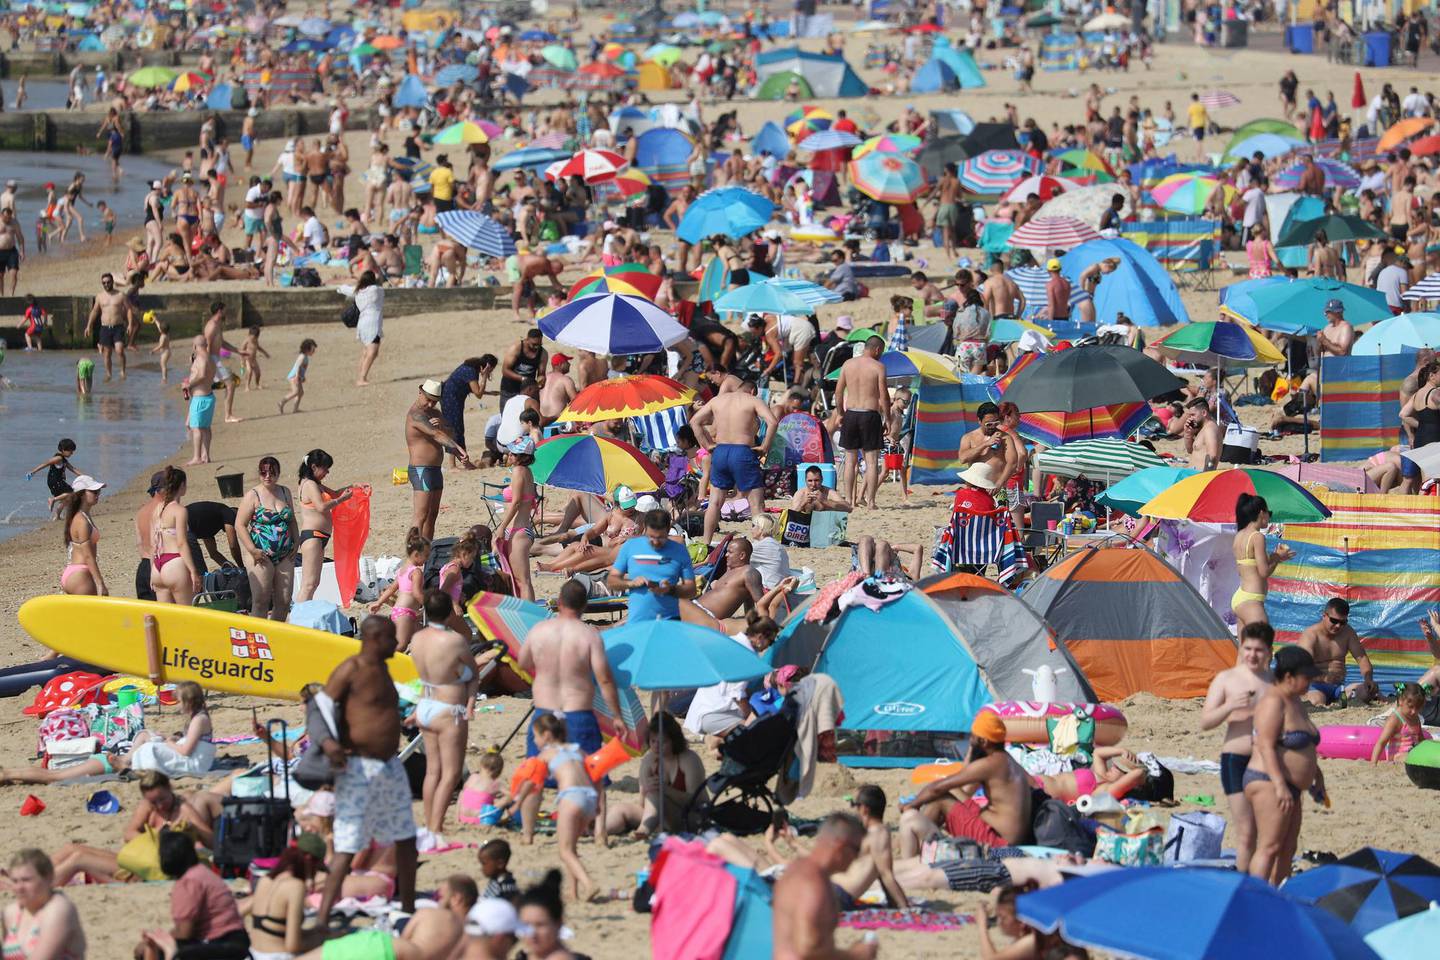 People gather on the beach during hot weather in Bournemouth, southern England, Sunday Aug. 9, 2020. Many Britons are set to bask in another hot day, with clear skies and hot temperatures predicted to continue. (Andrew Matthews/PA via AP)